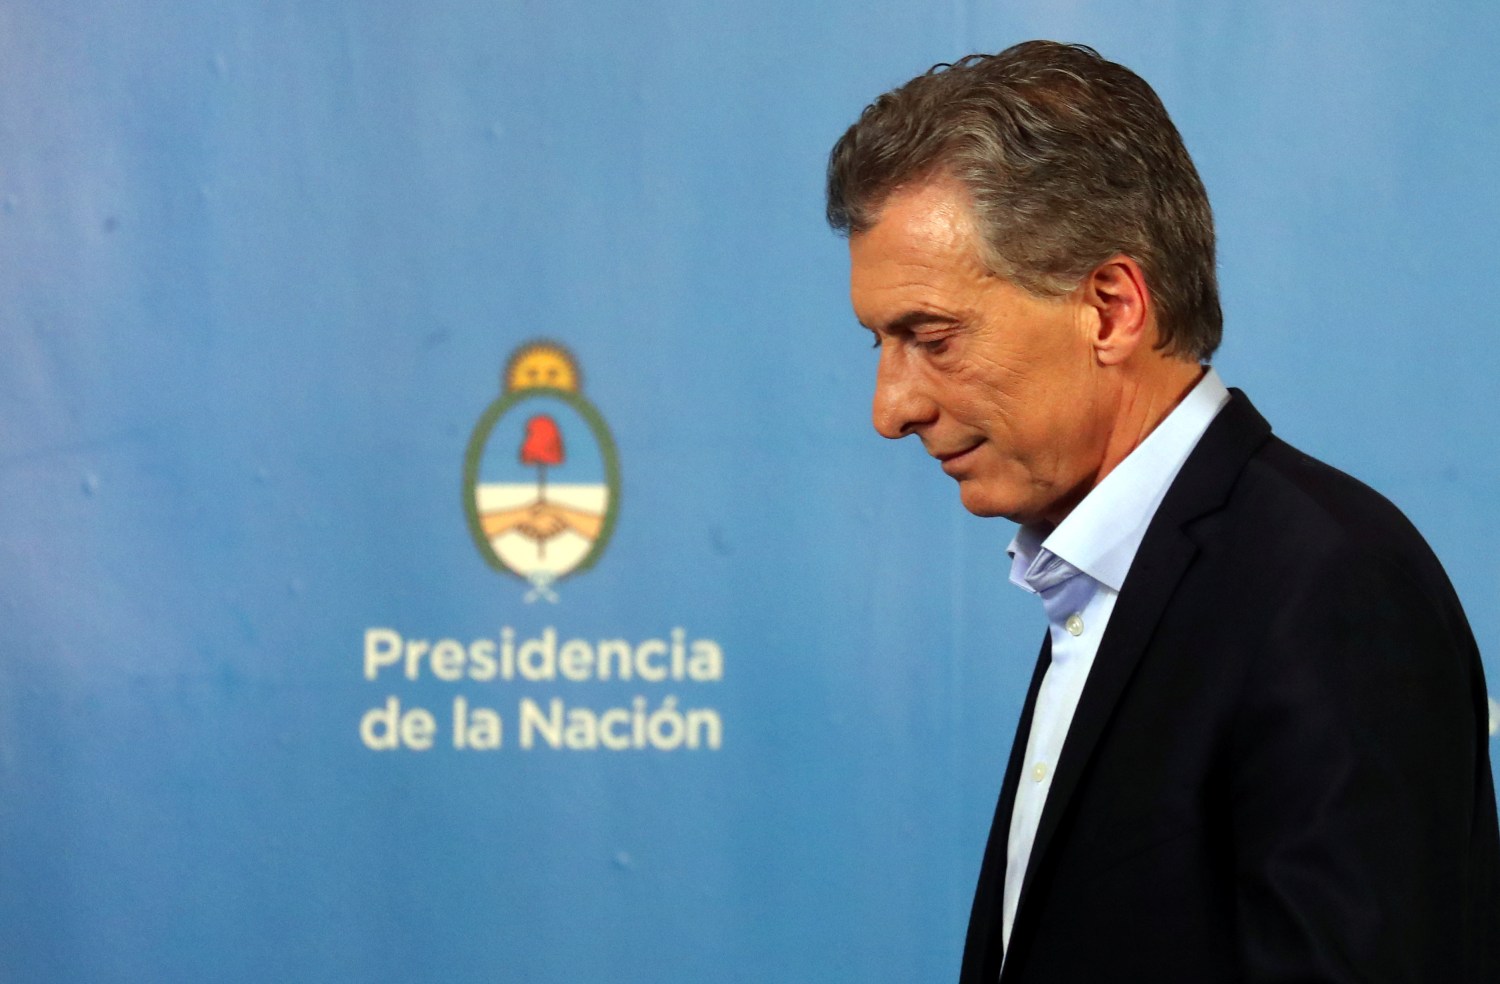 Argentina's President Mauricio Macri leaves afteer a news conference at the Olivos Presidential Residence in Buenos Aires, Argentina, July 18, 2018. Picture taken July 18, 2018. REUTERS/Marcos Brindicci - RC1FA9BE17D0